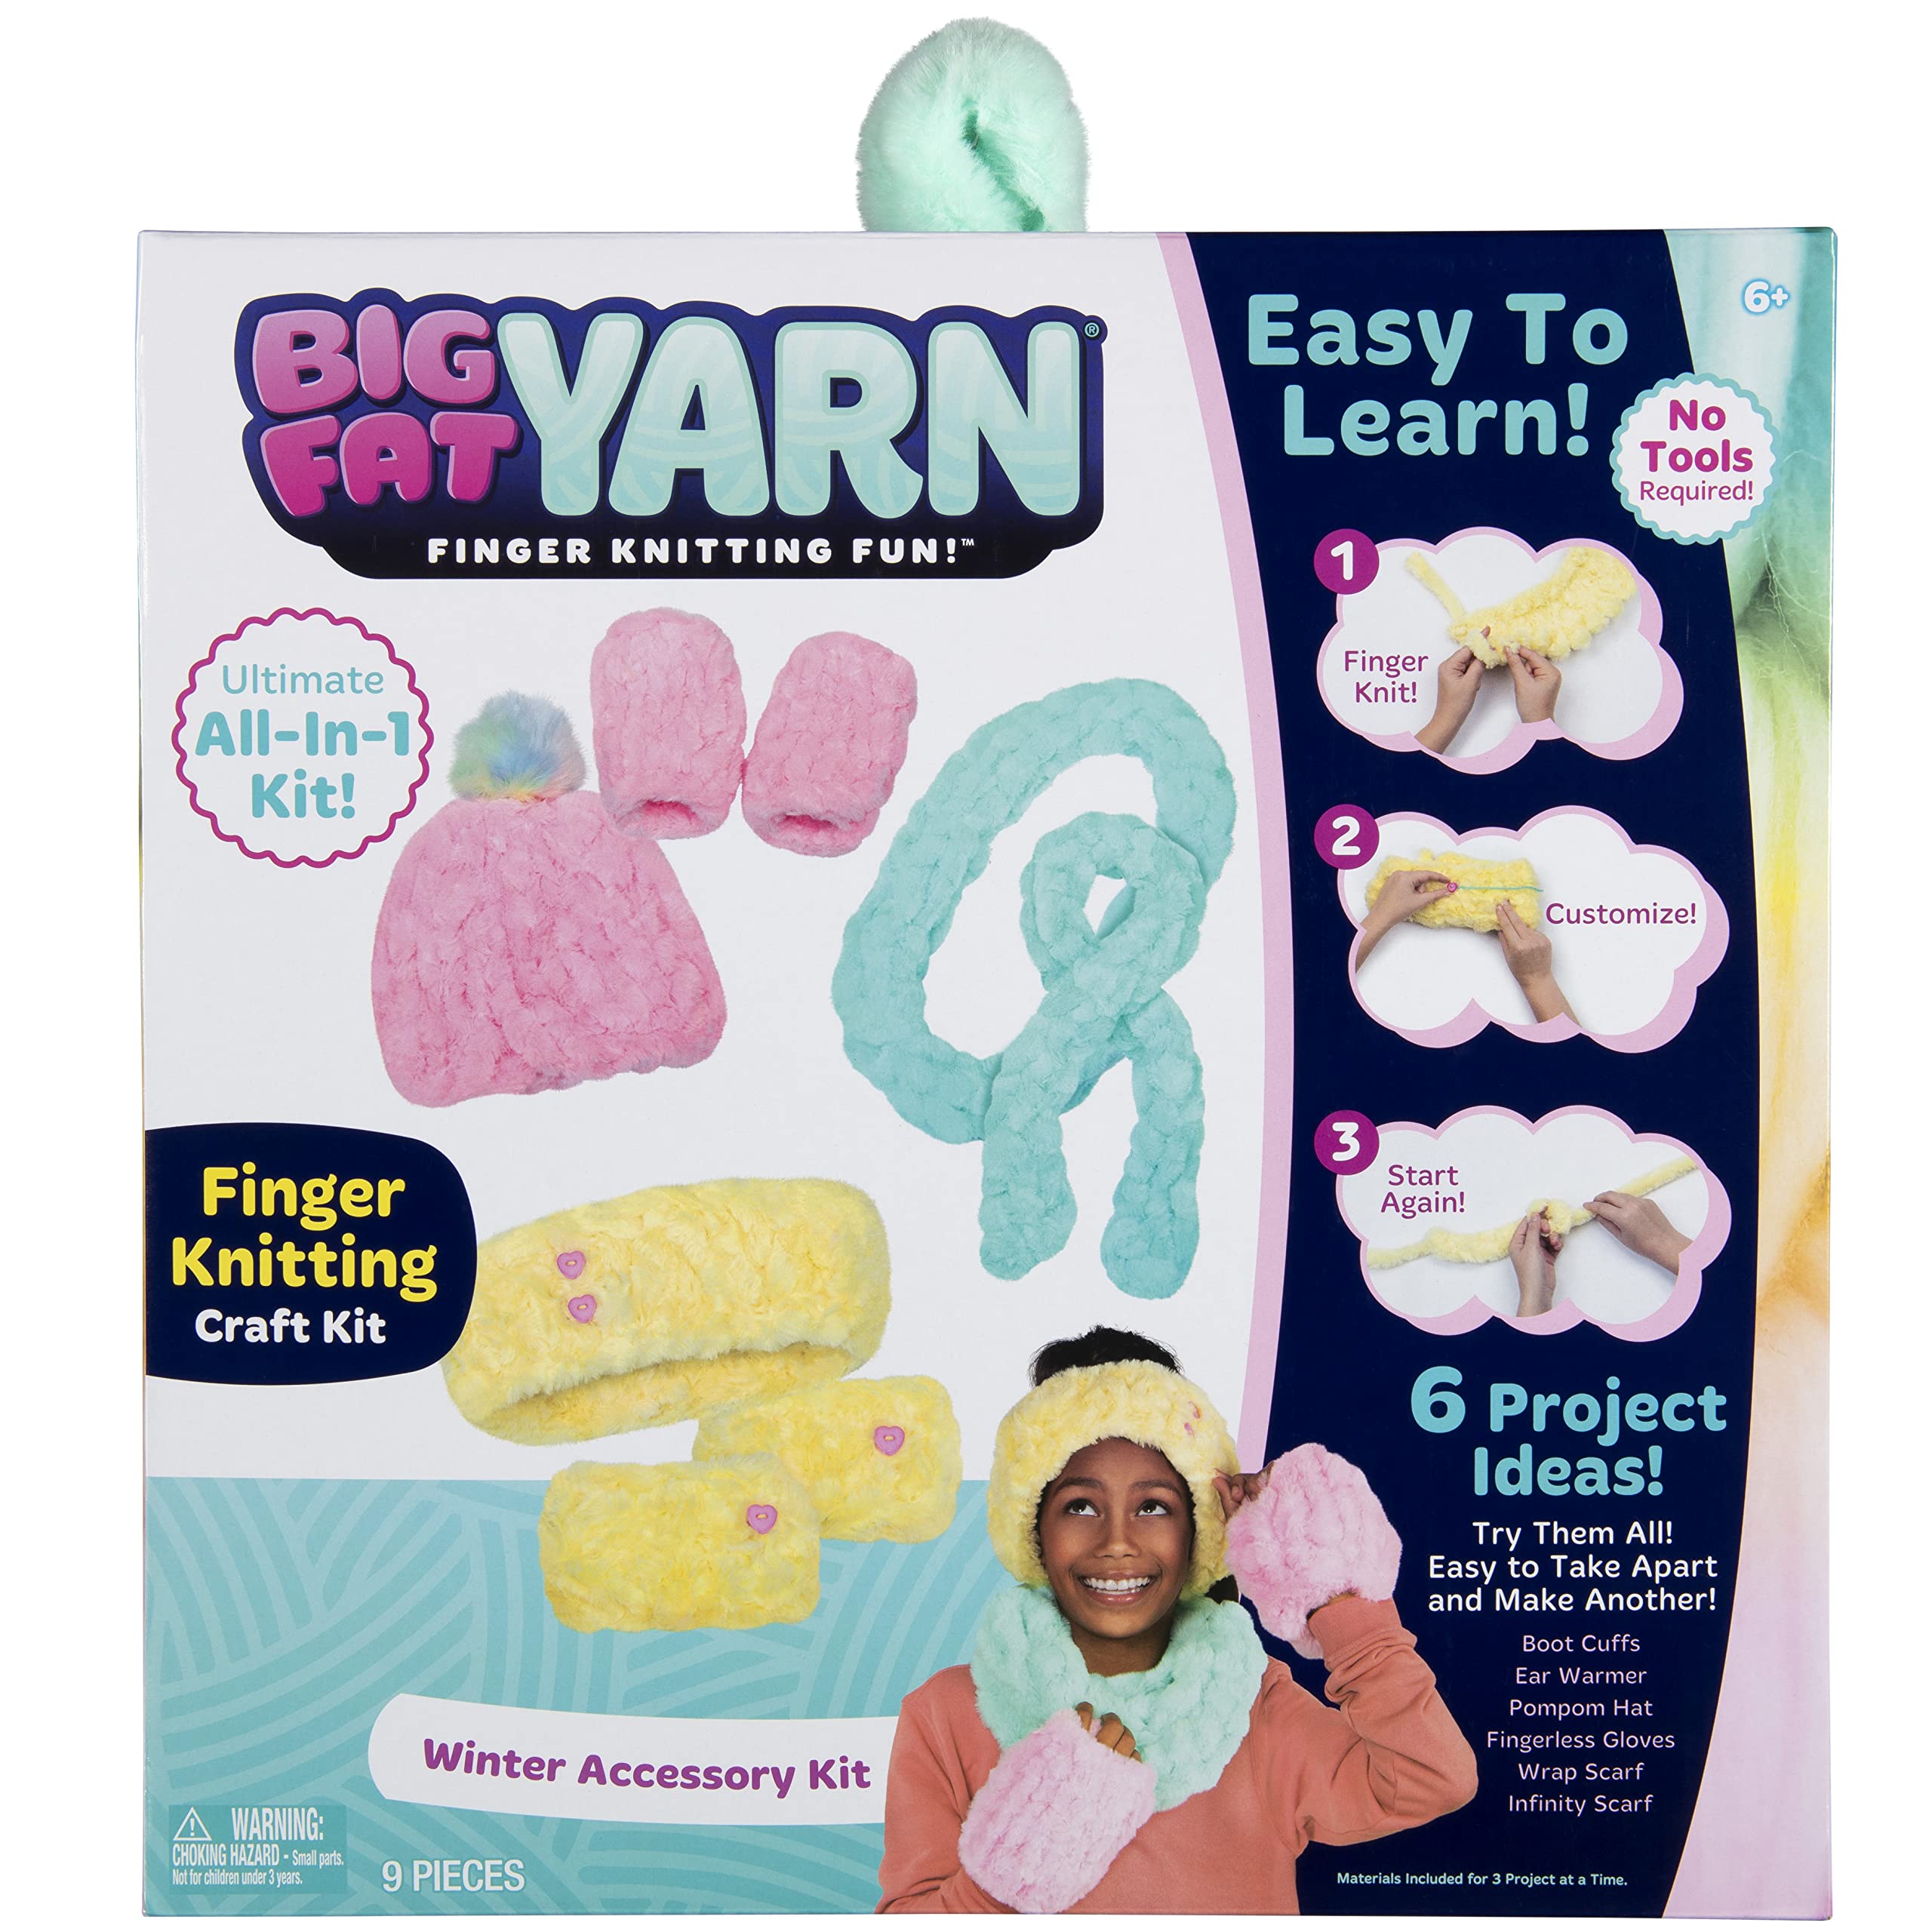 Big Fat Yarn Winter Accessory Kit - Fun DIY All in One Finger Knitting Kit - Level 1: Beginner, Arts and Crafts for Kids Teens Tweens and Adults - 6 Project Ideas - Ages 6+